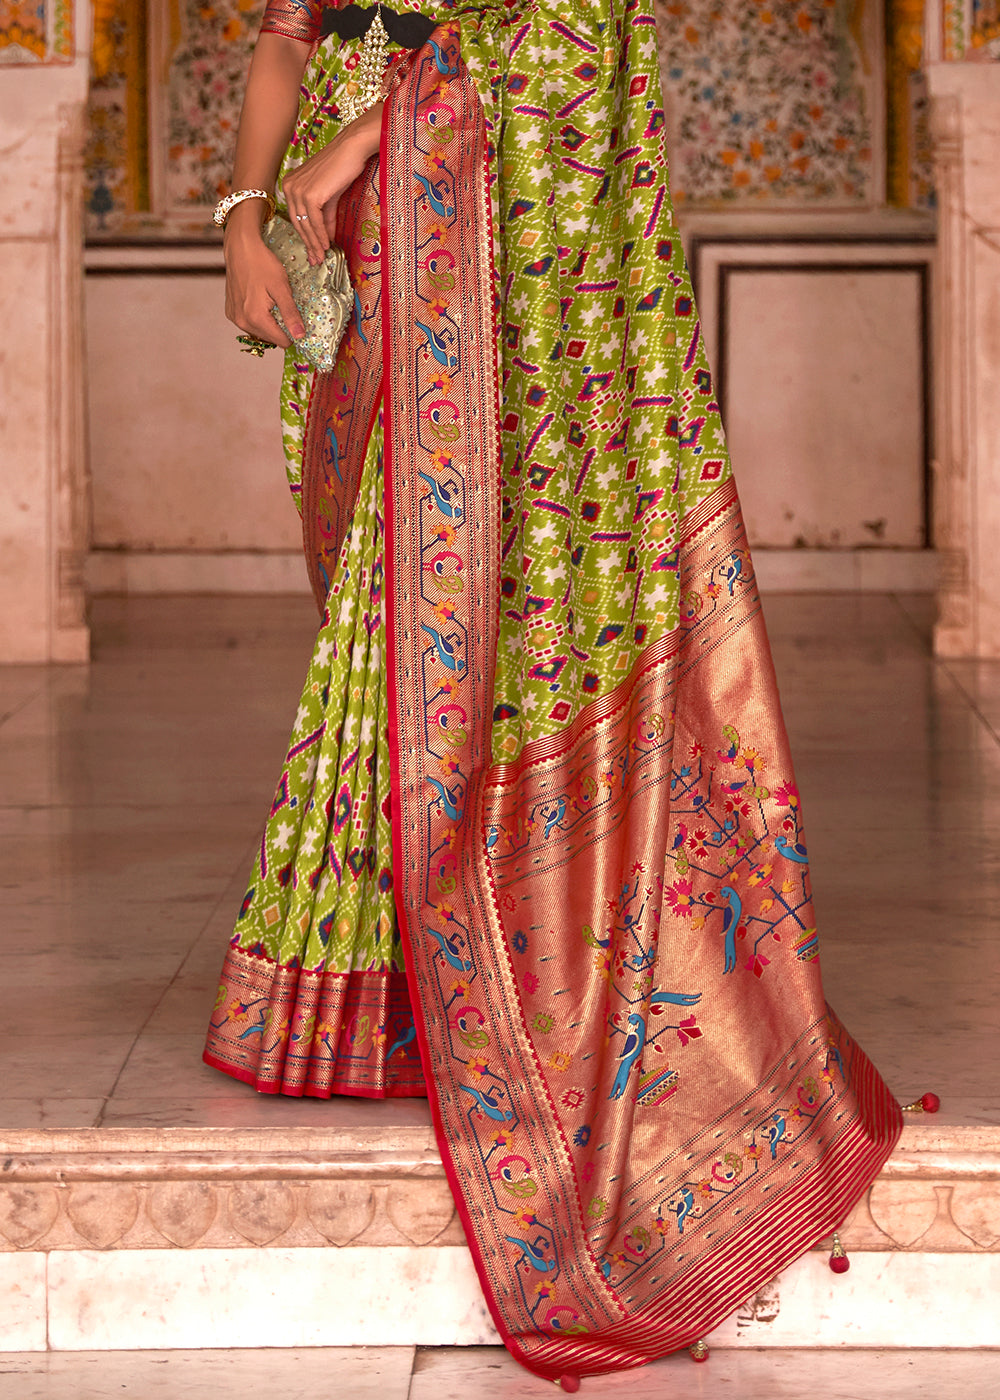 Stunning Green and Red Patola Silk Saree - A Perfect Blend of Tradition and Style